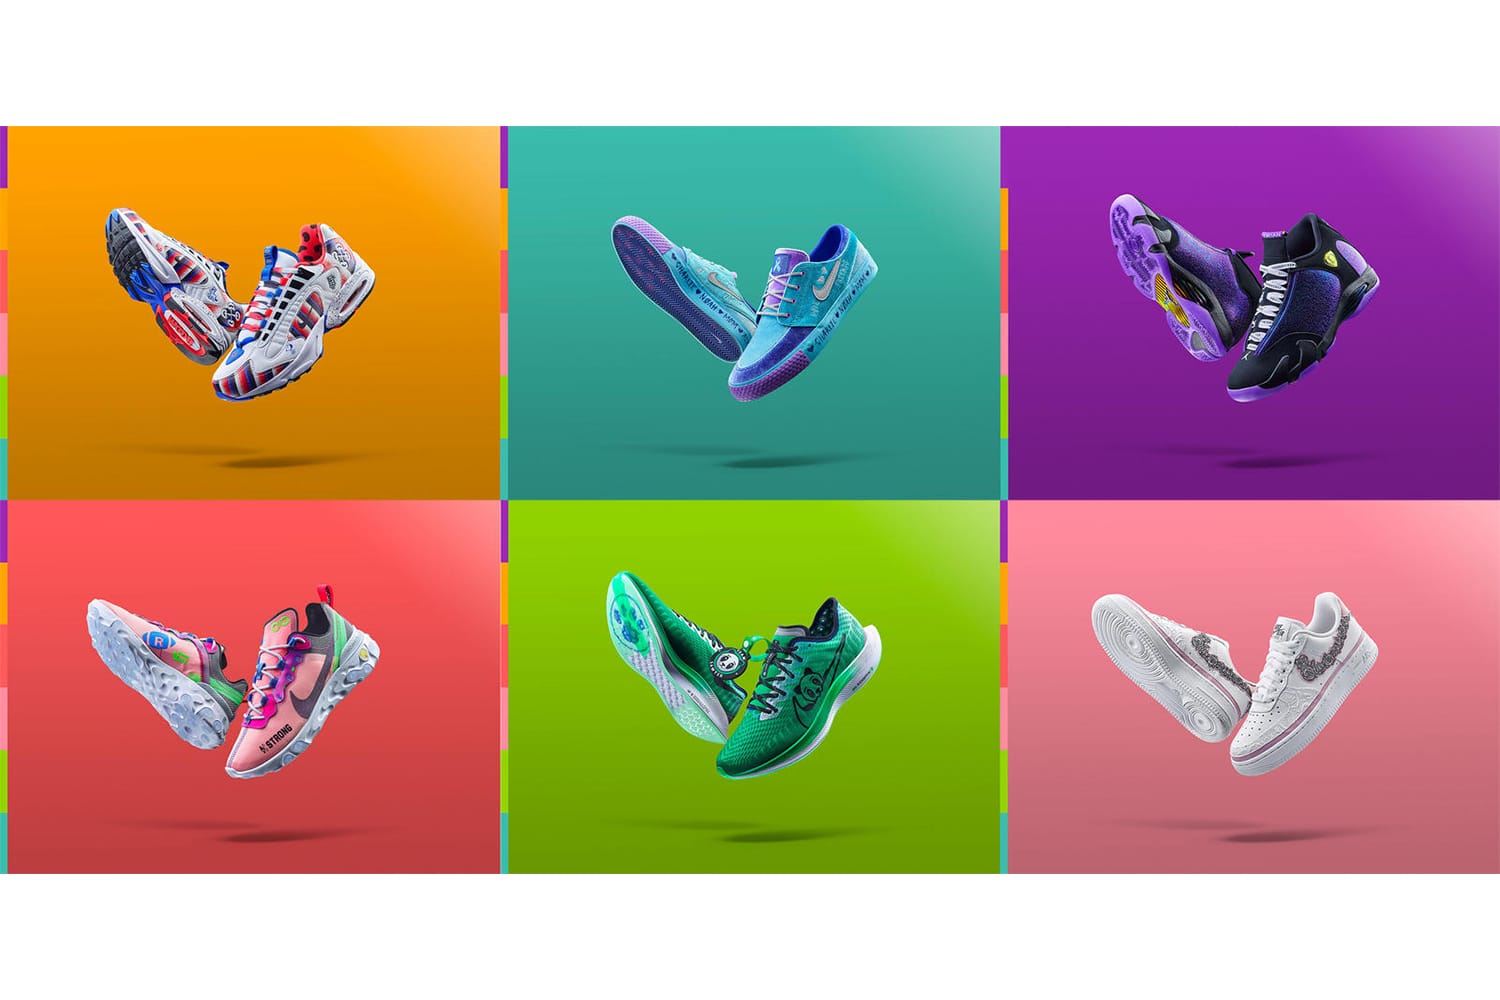 doernbecher freestyle collection